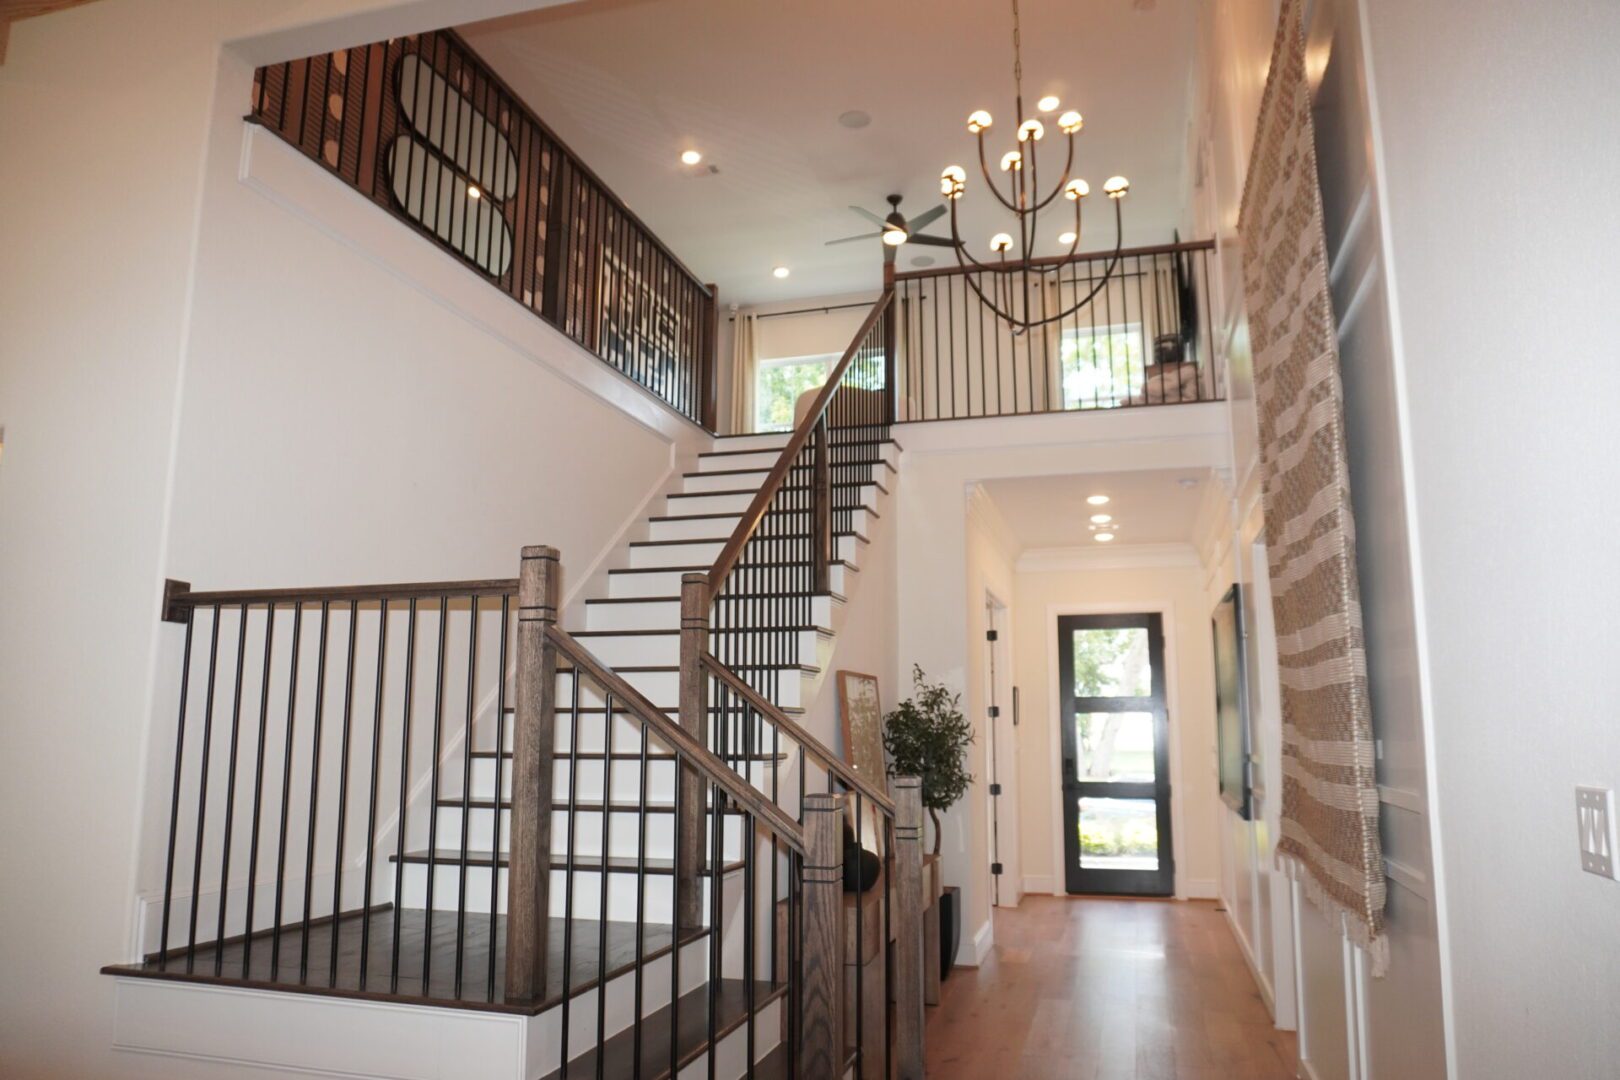 A large open staircase in the middle of a house.